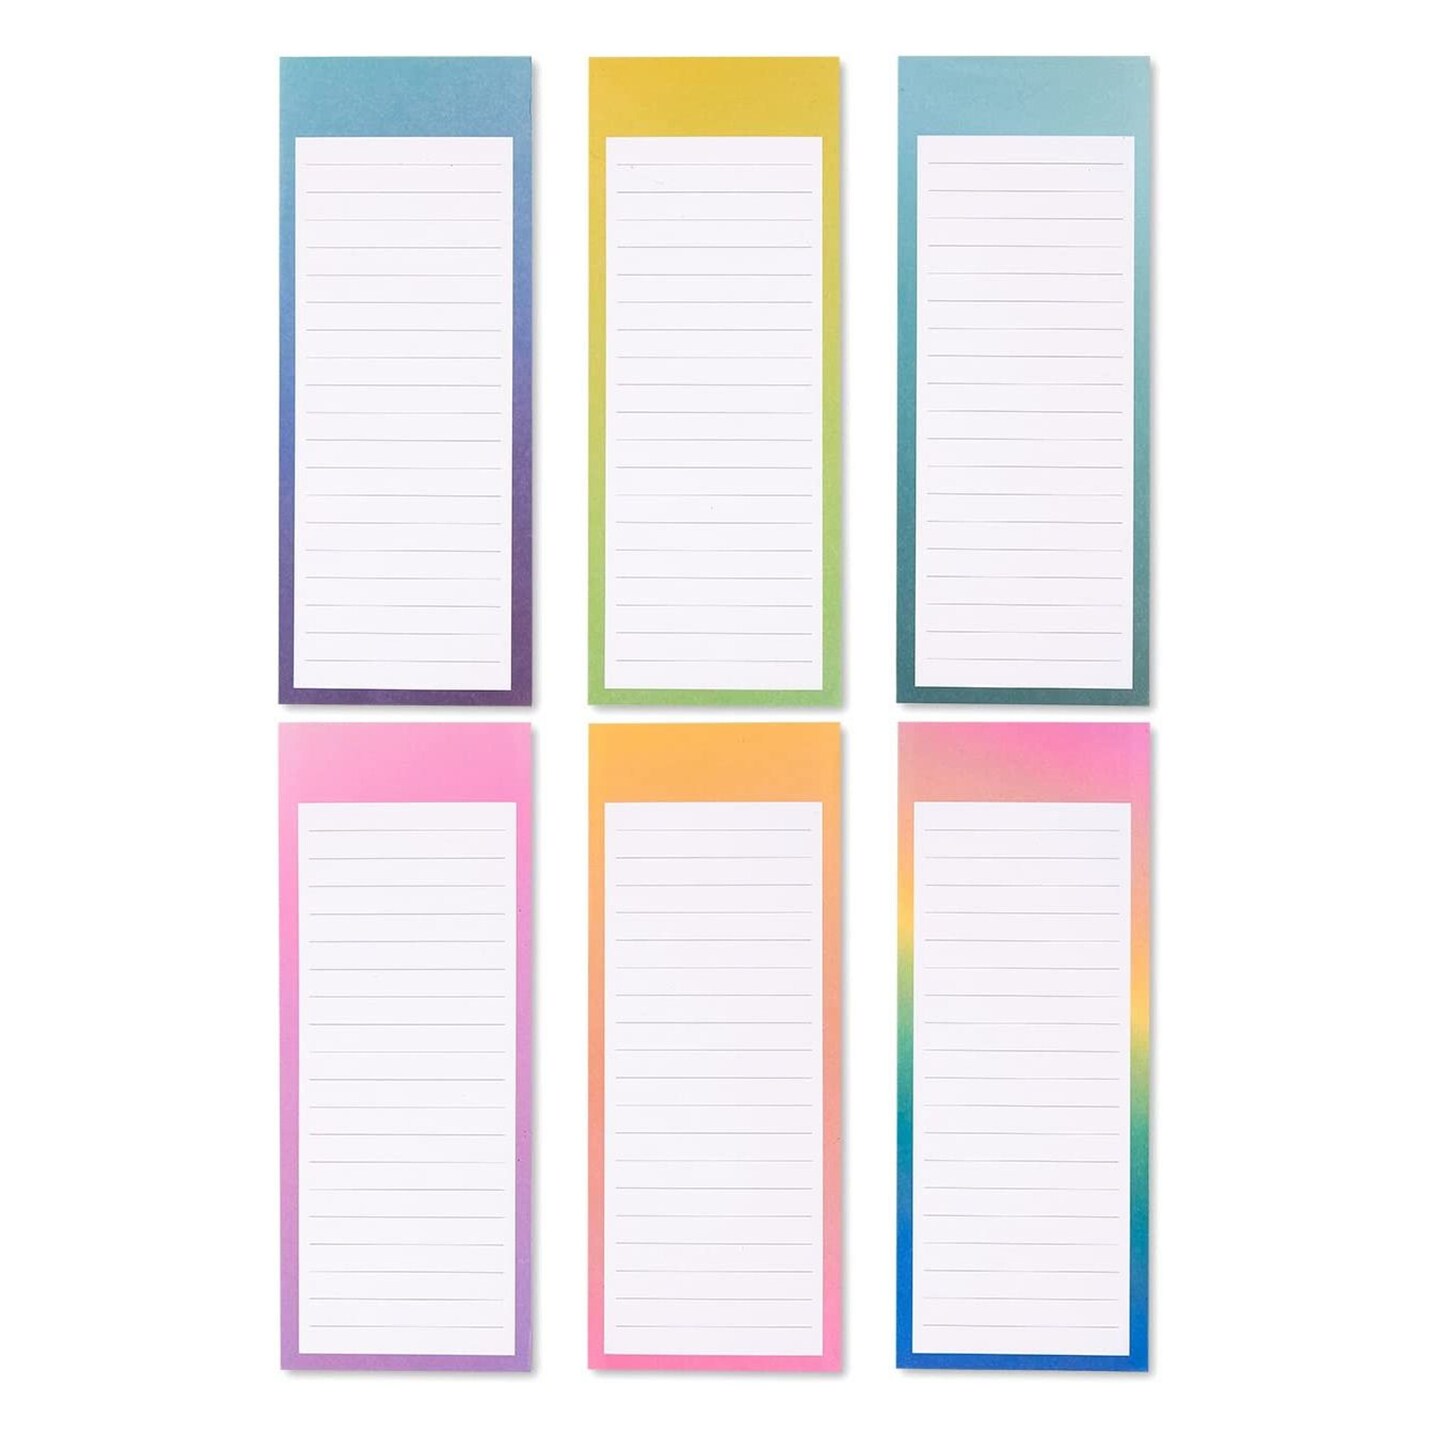 12 Pack Magnetic Notepads for Fridge, Lined To Do Memos List, Watercolor Design (3.5x9 Inches, 60 Sheets Each)